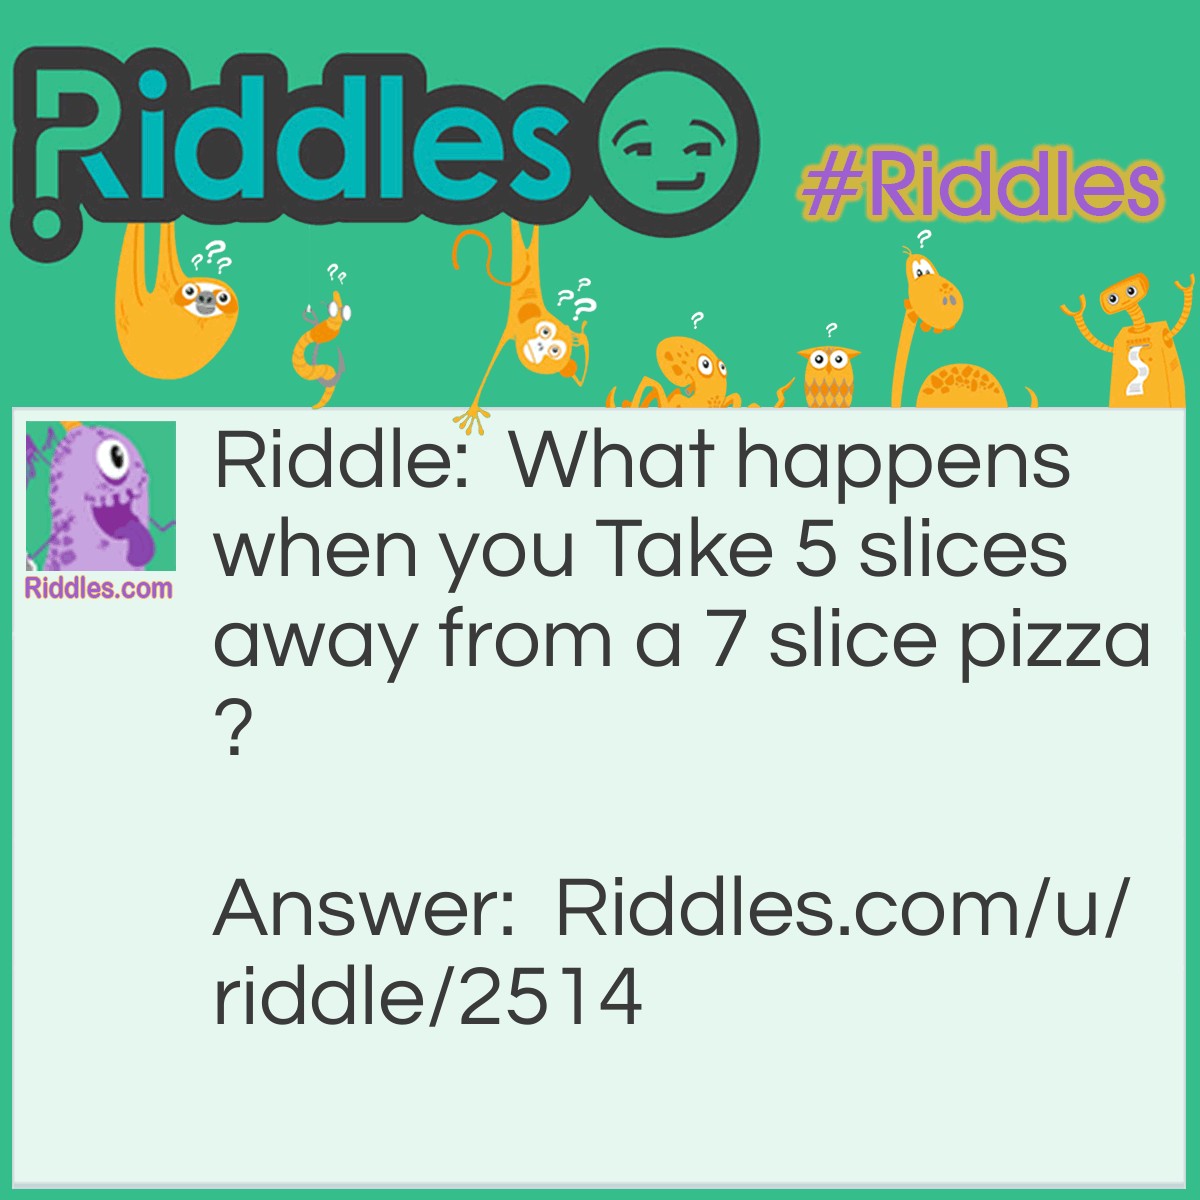 Riddle: What happens when you Take 5 slices away from a 7 slice pizza? Answer: Nothing!